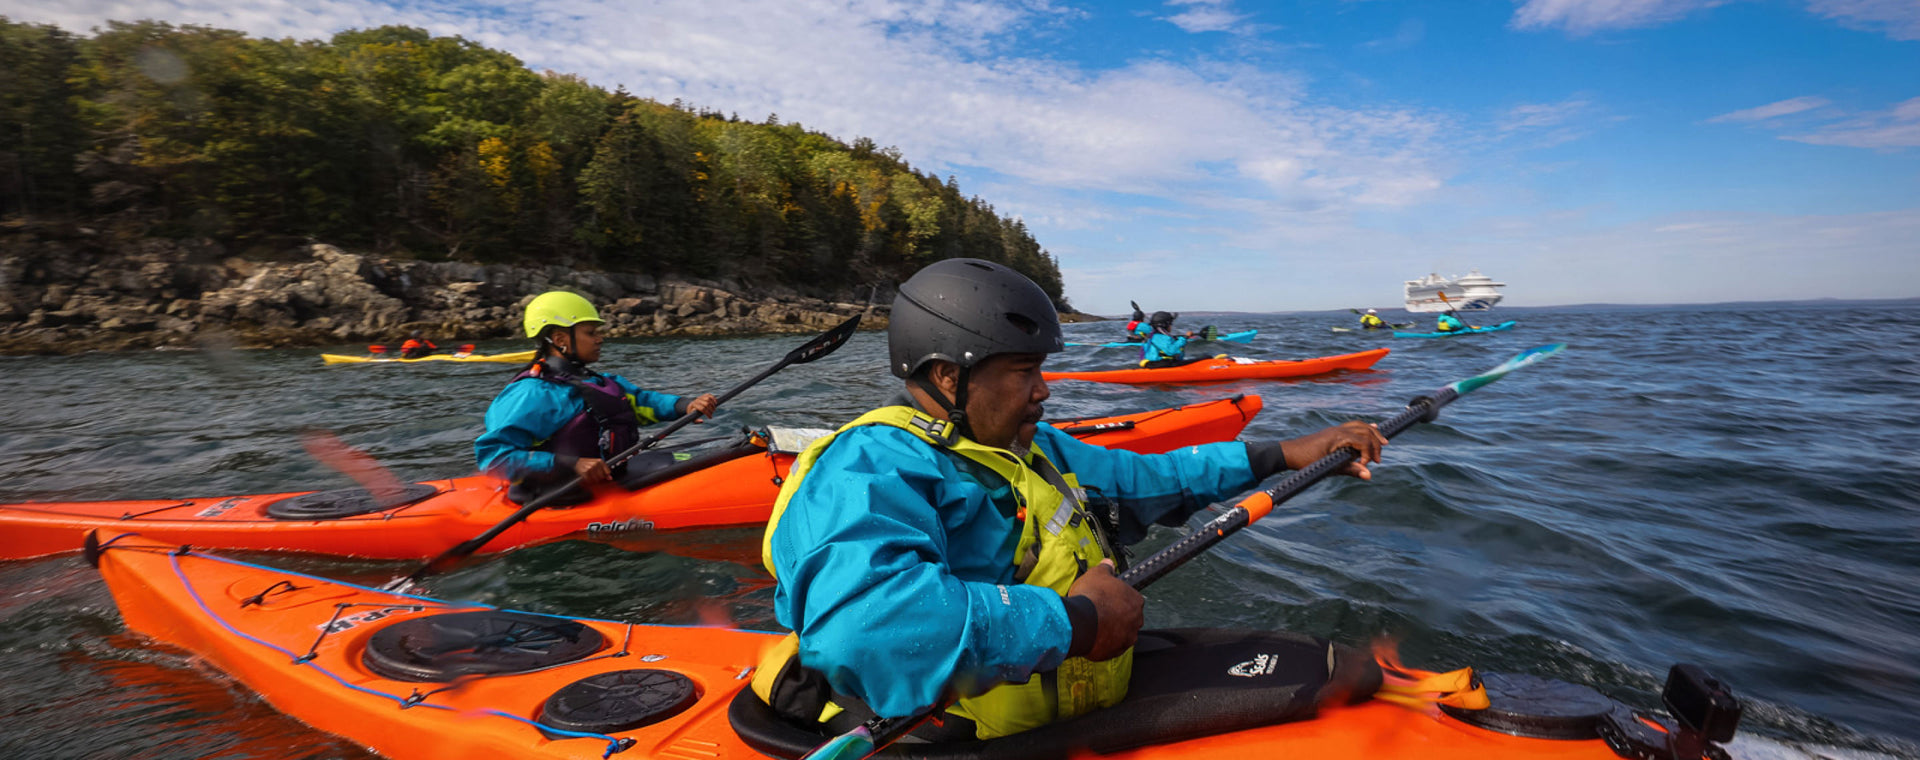 Group of ocean kayakers paddling along foresty and rocky coastline